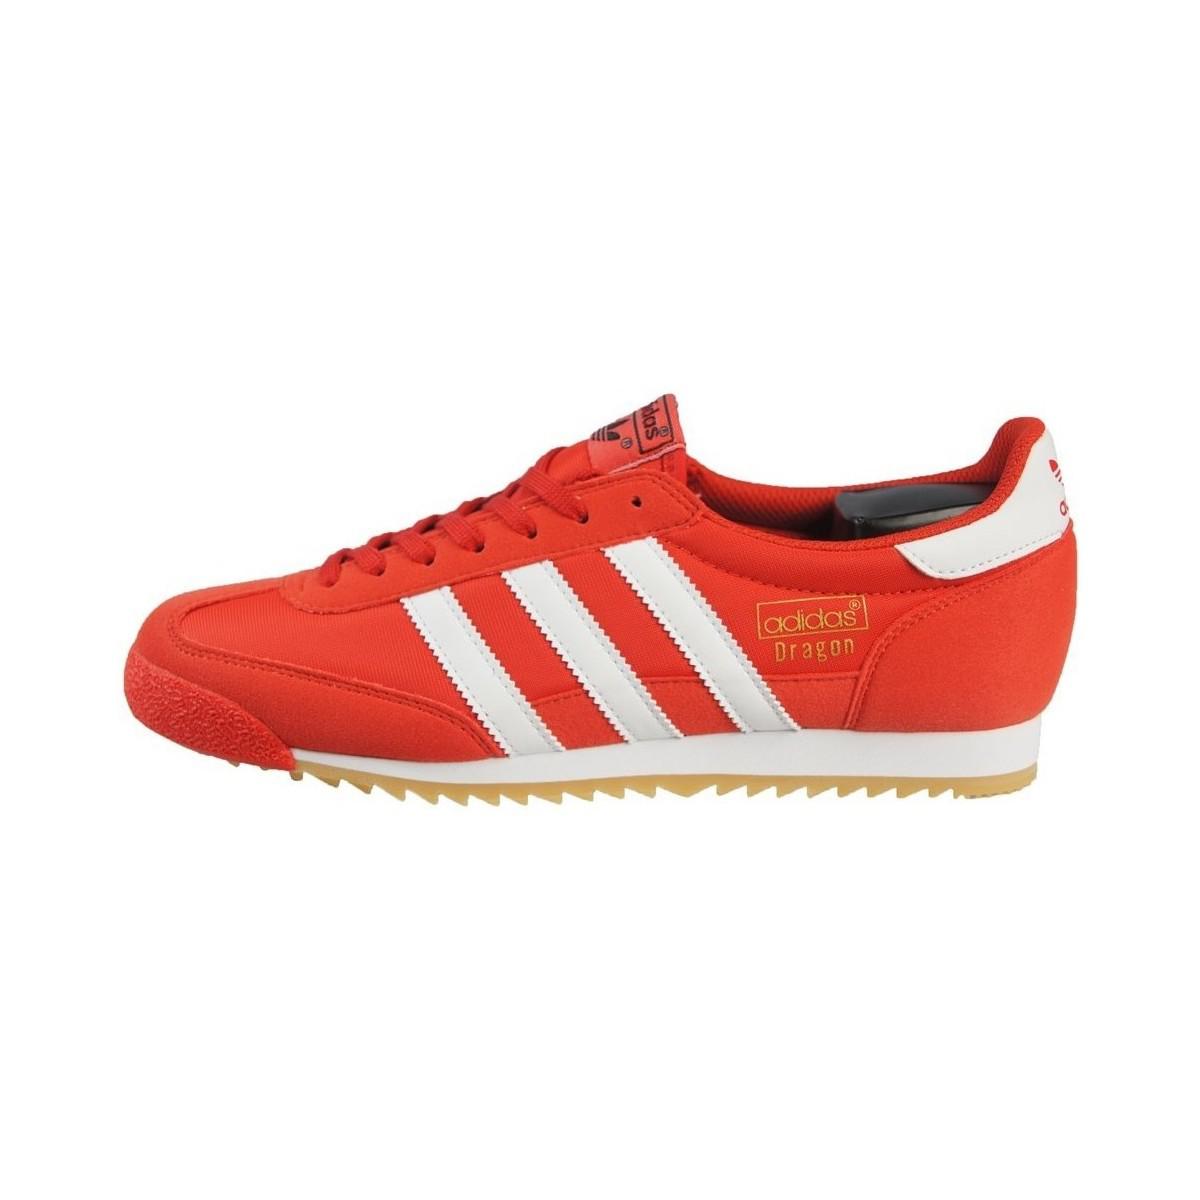 adidas dragon trainers red